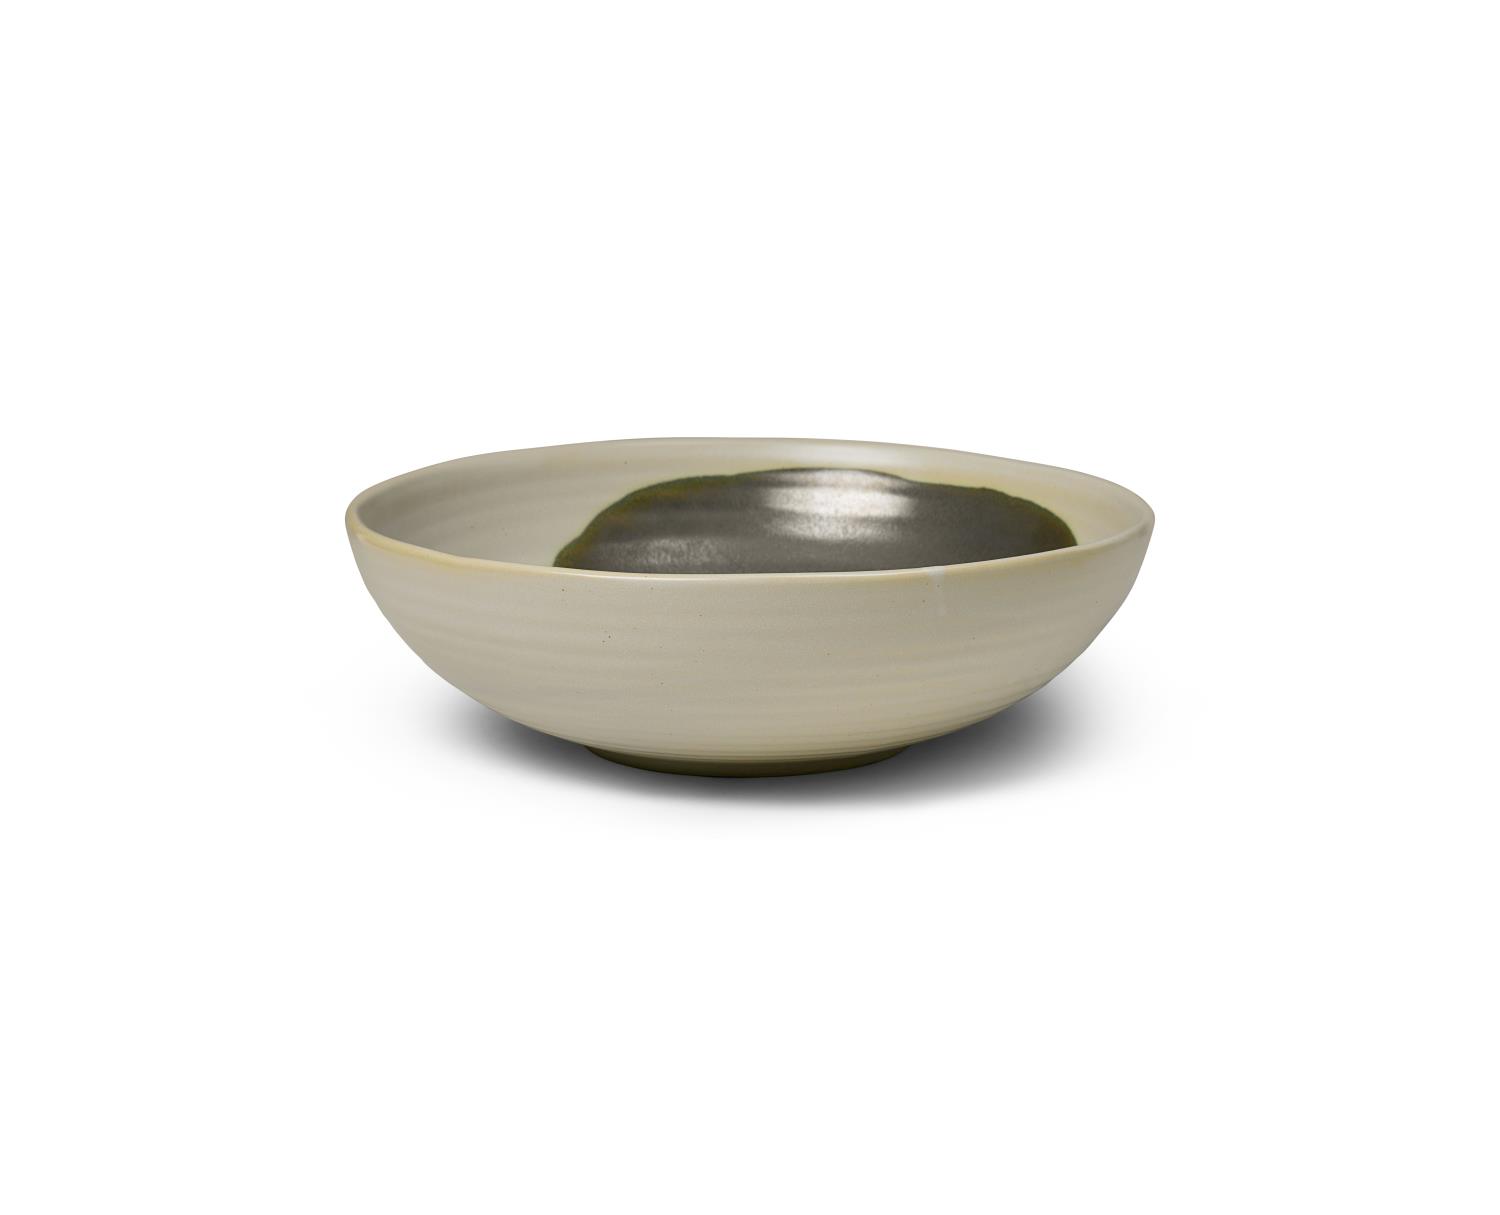 Ferm Living - Omhu Bowl - Large - Off-White and Charcoal